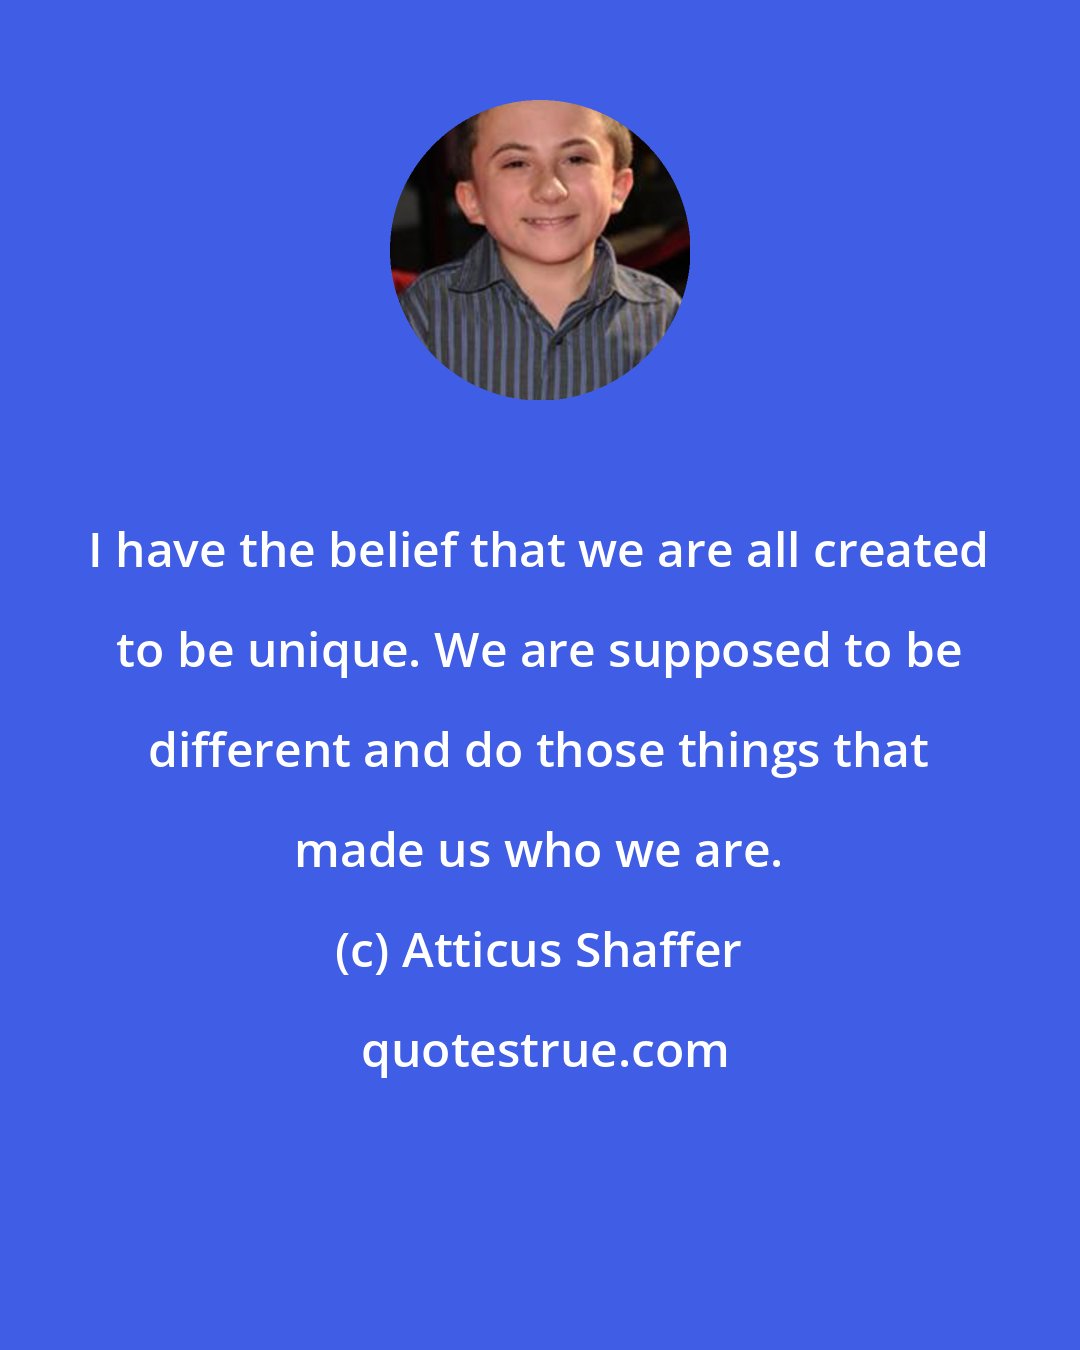 Atticus Shaffer: I have the belief that we are all created to be unique. We are supposed to be different and do those things that made us who we are.